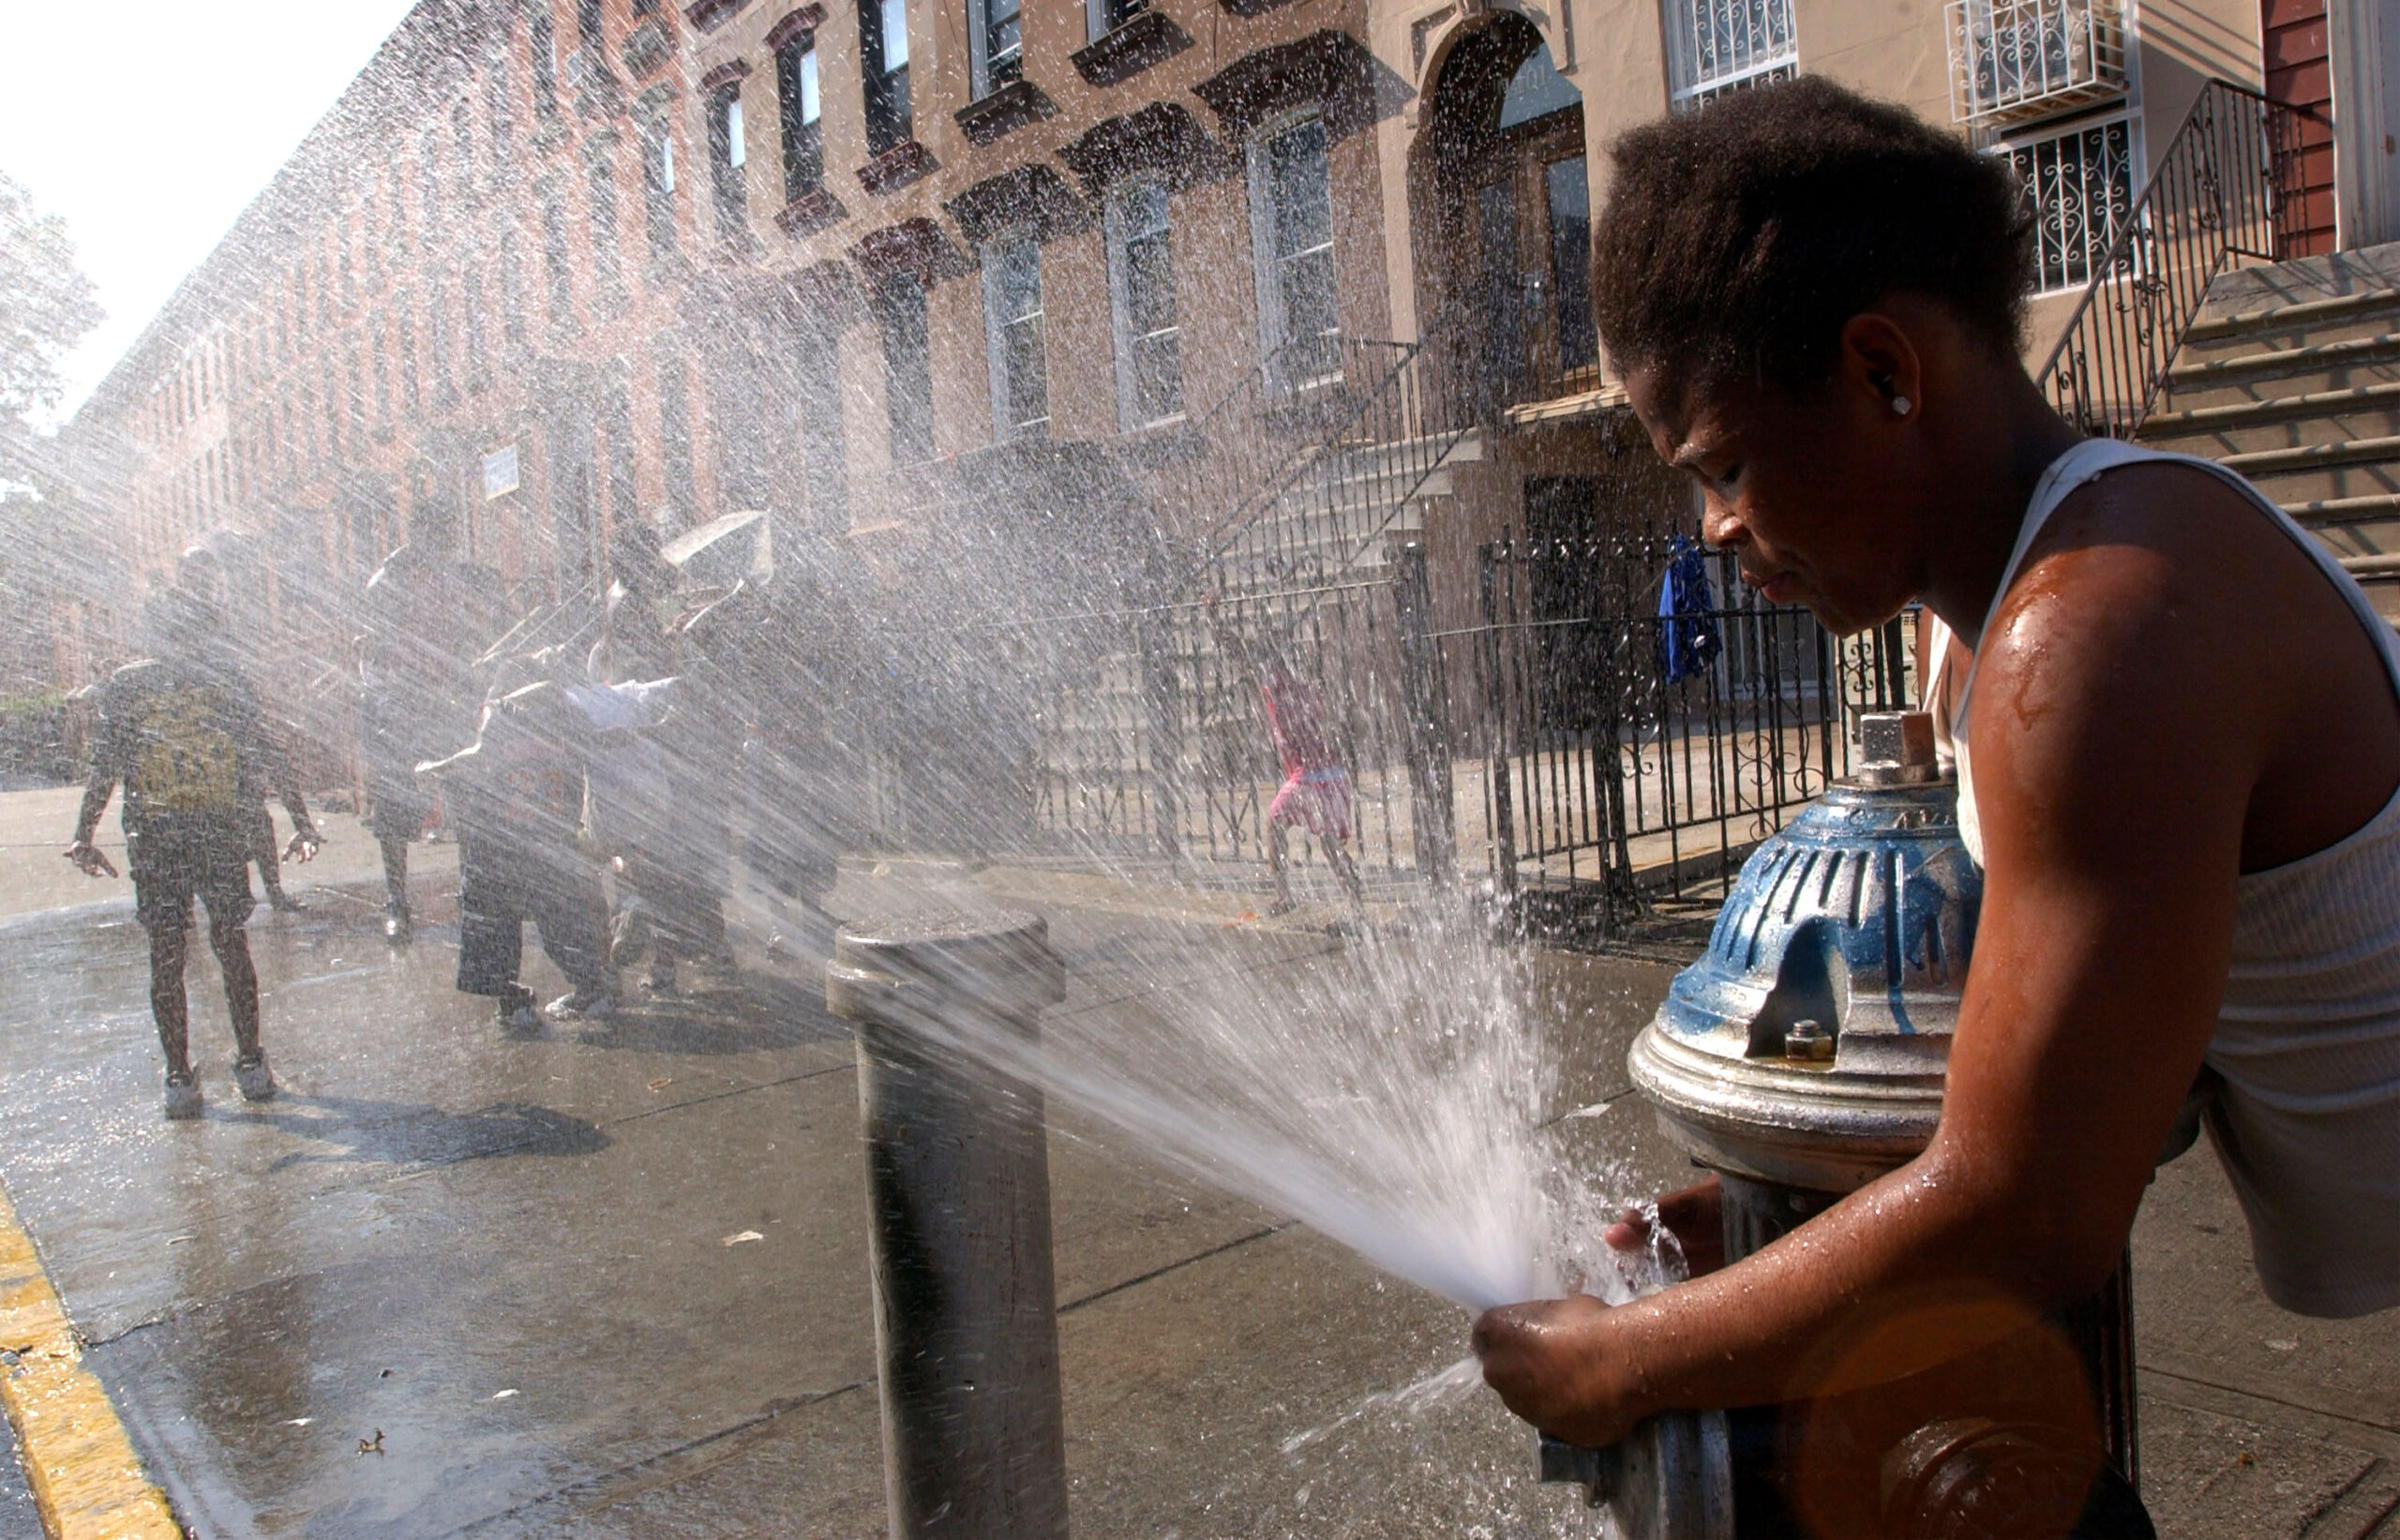 A person is redirecting the spray from a fire hydrant on a sidewalk. Other children are standing nearby.